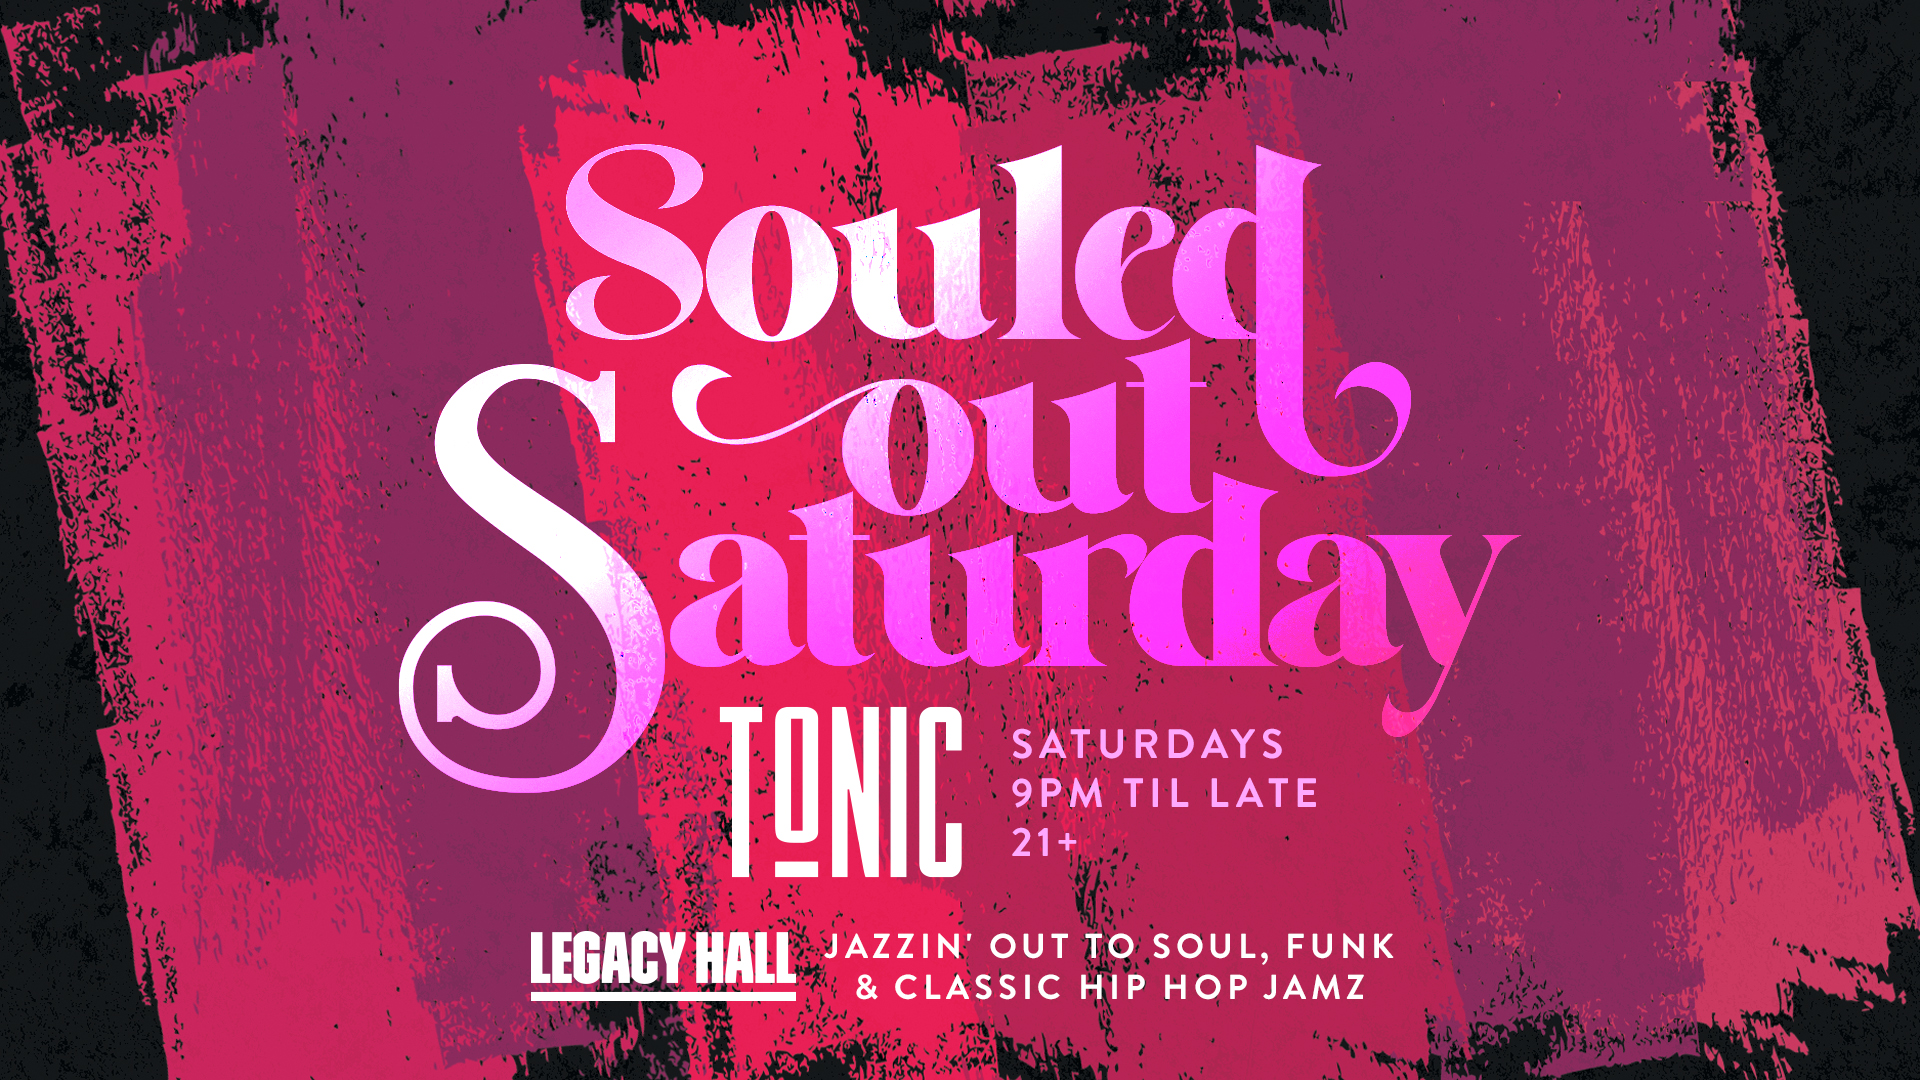 Souled Out Saturdays - hero